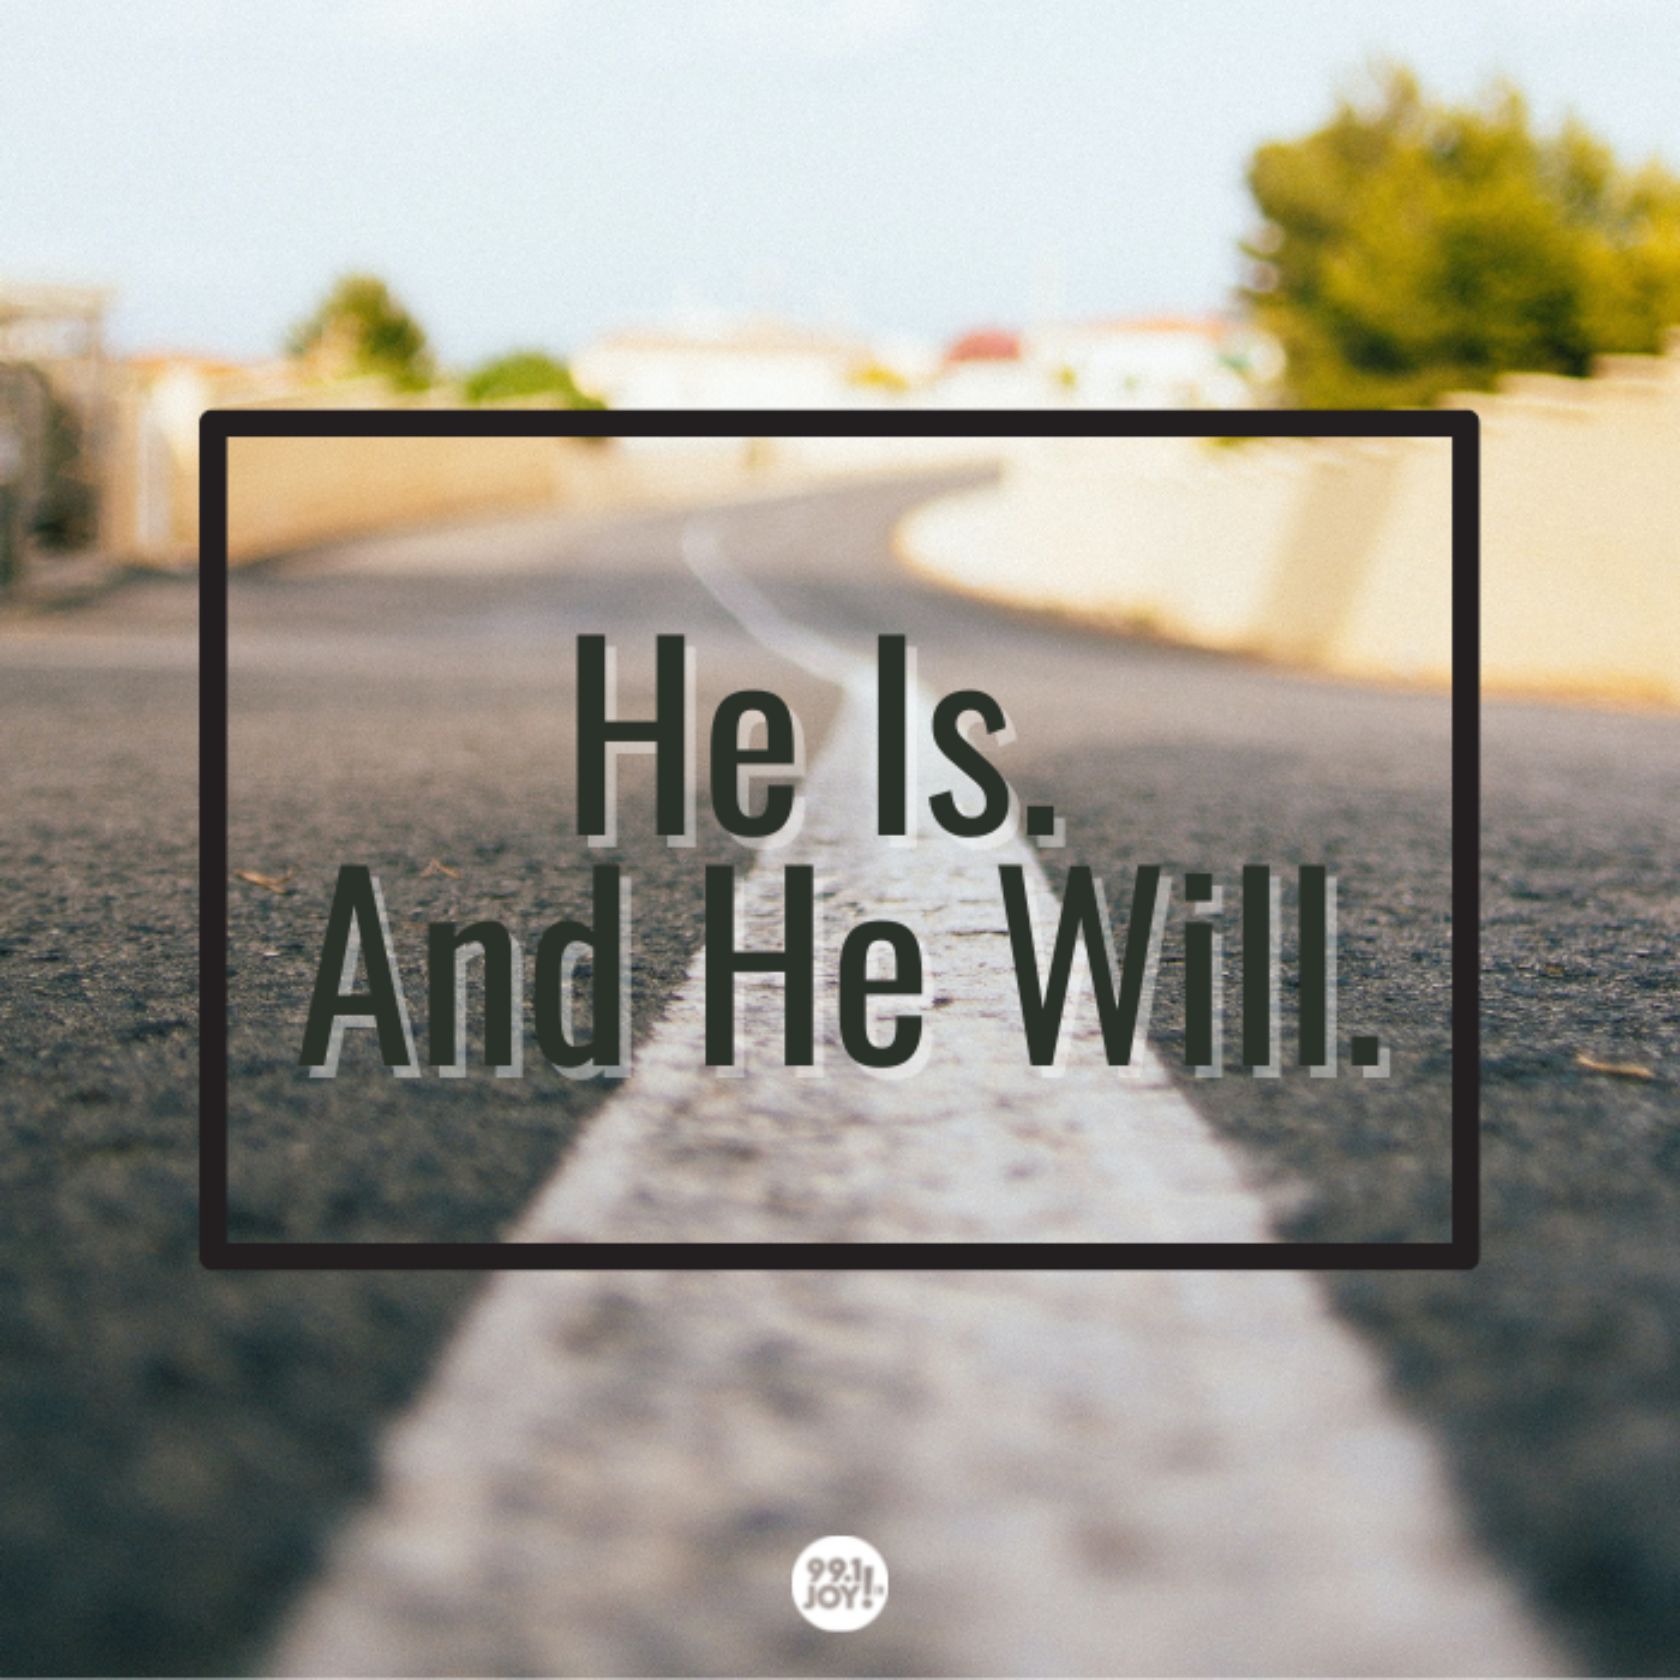 He Is. And He Will.